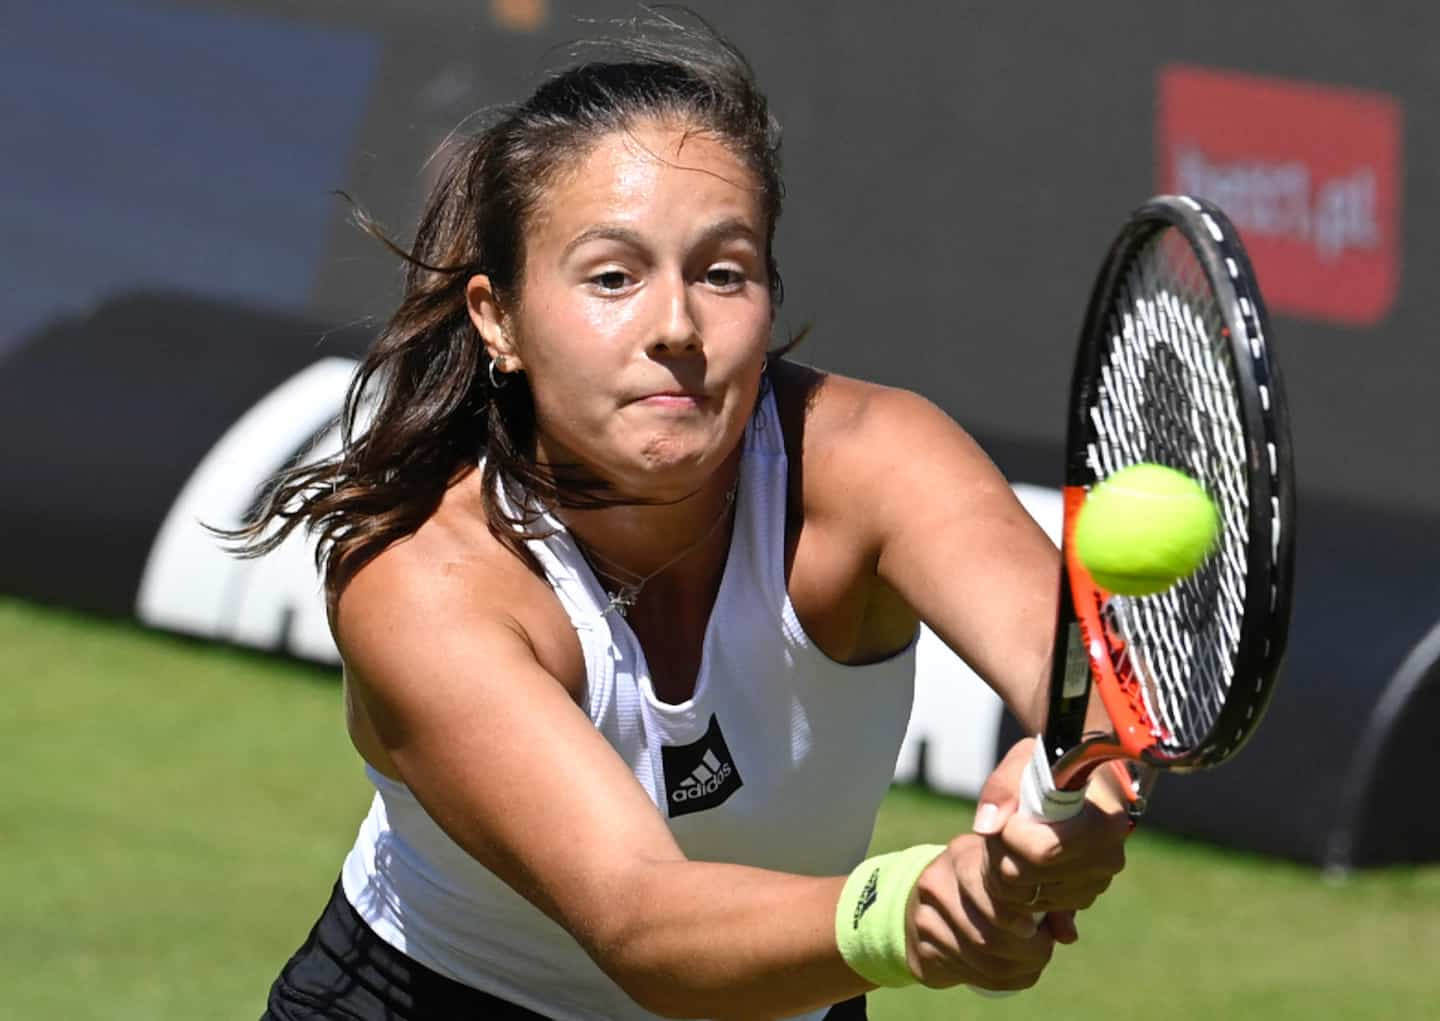 Russian tennis player Daria Kasatkina, 12th in the world, comes out